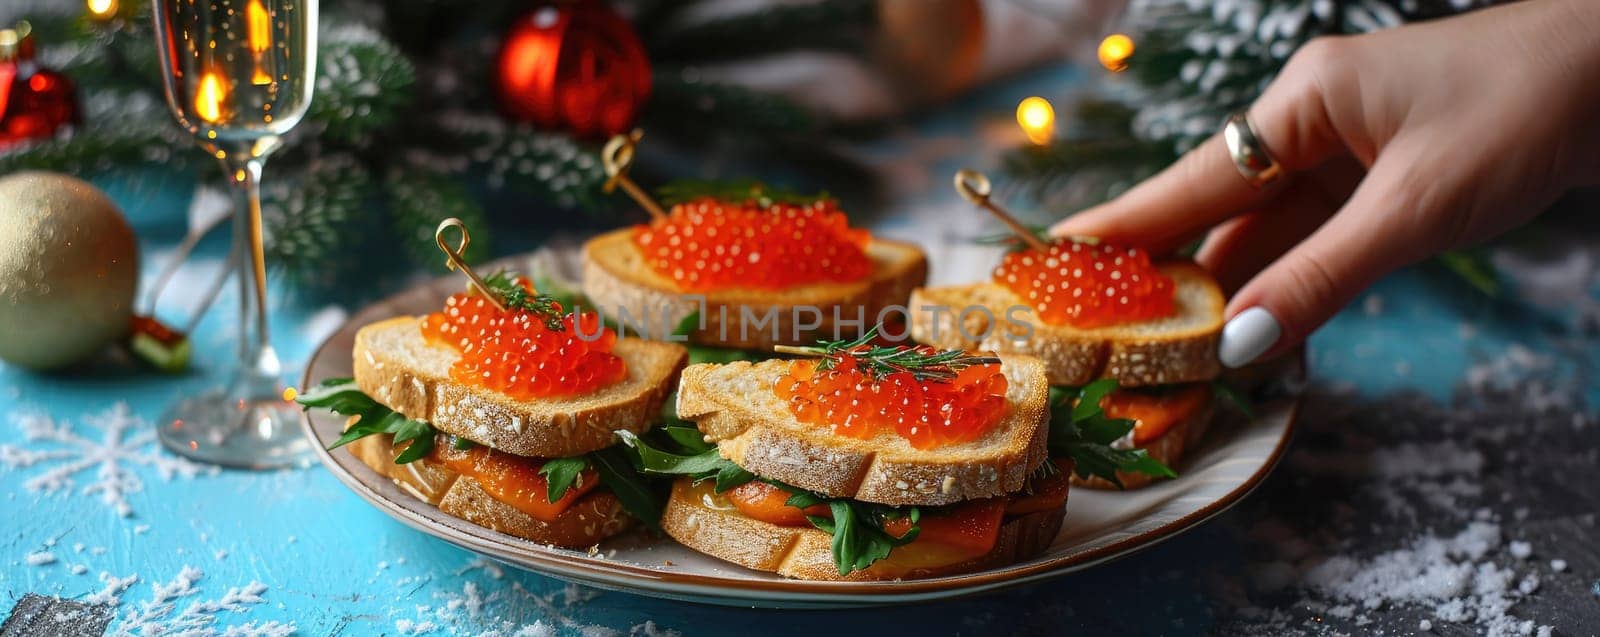 Luxury sandwich with red caviar presented in the hand of a lady on the background of a festive atmosphere